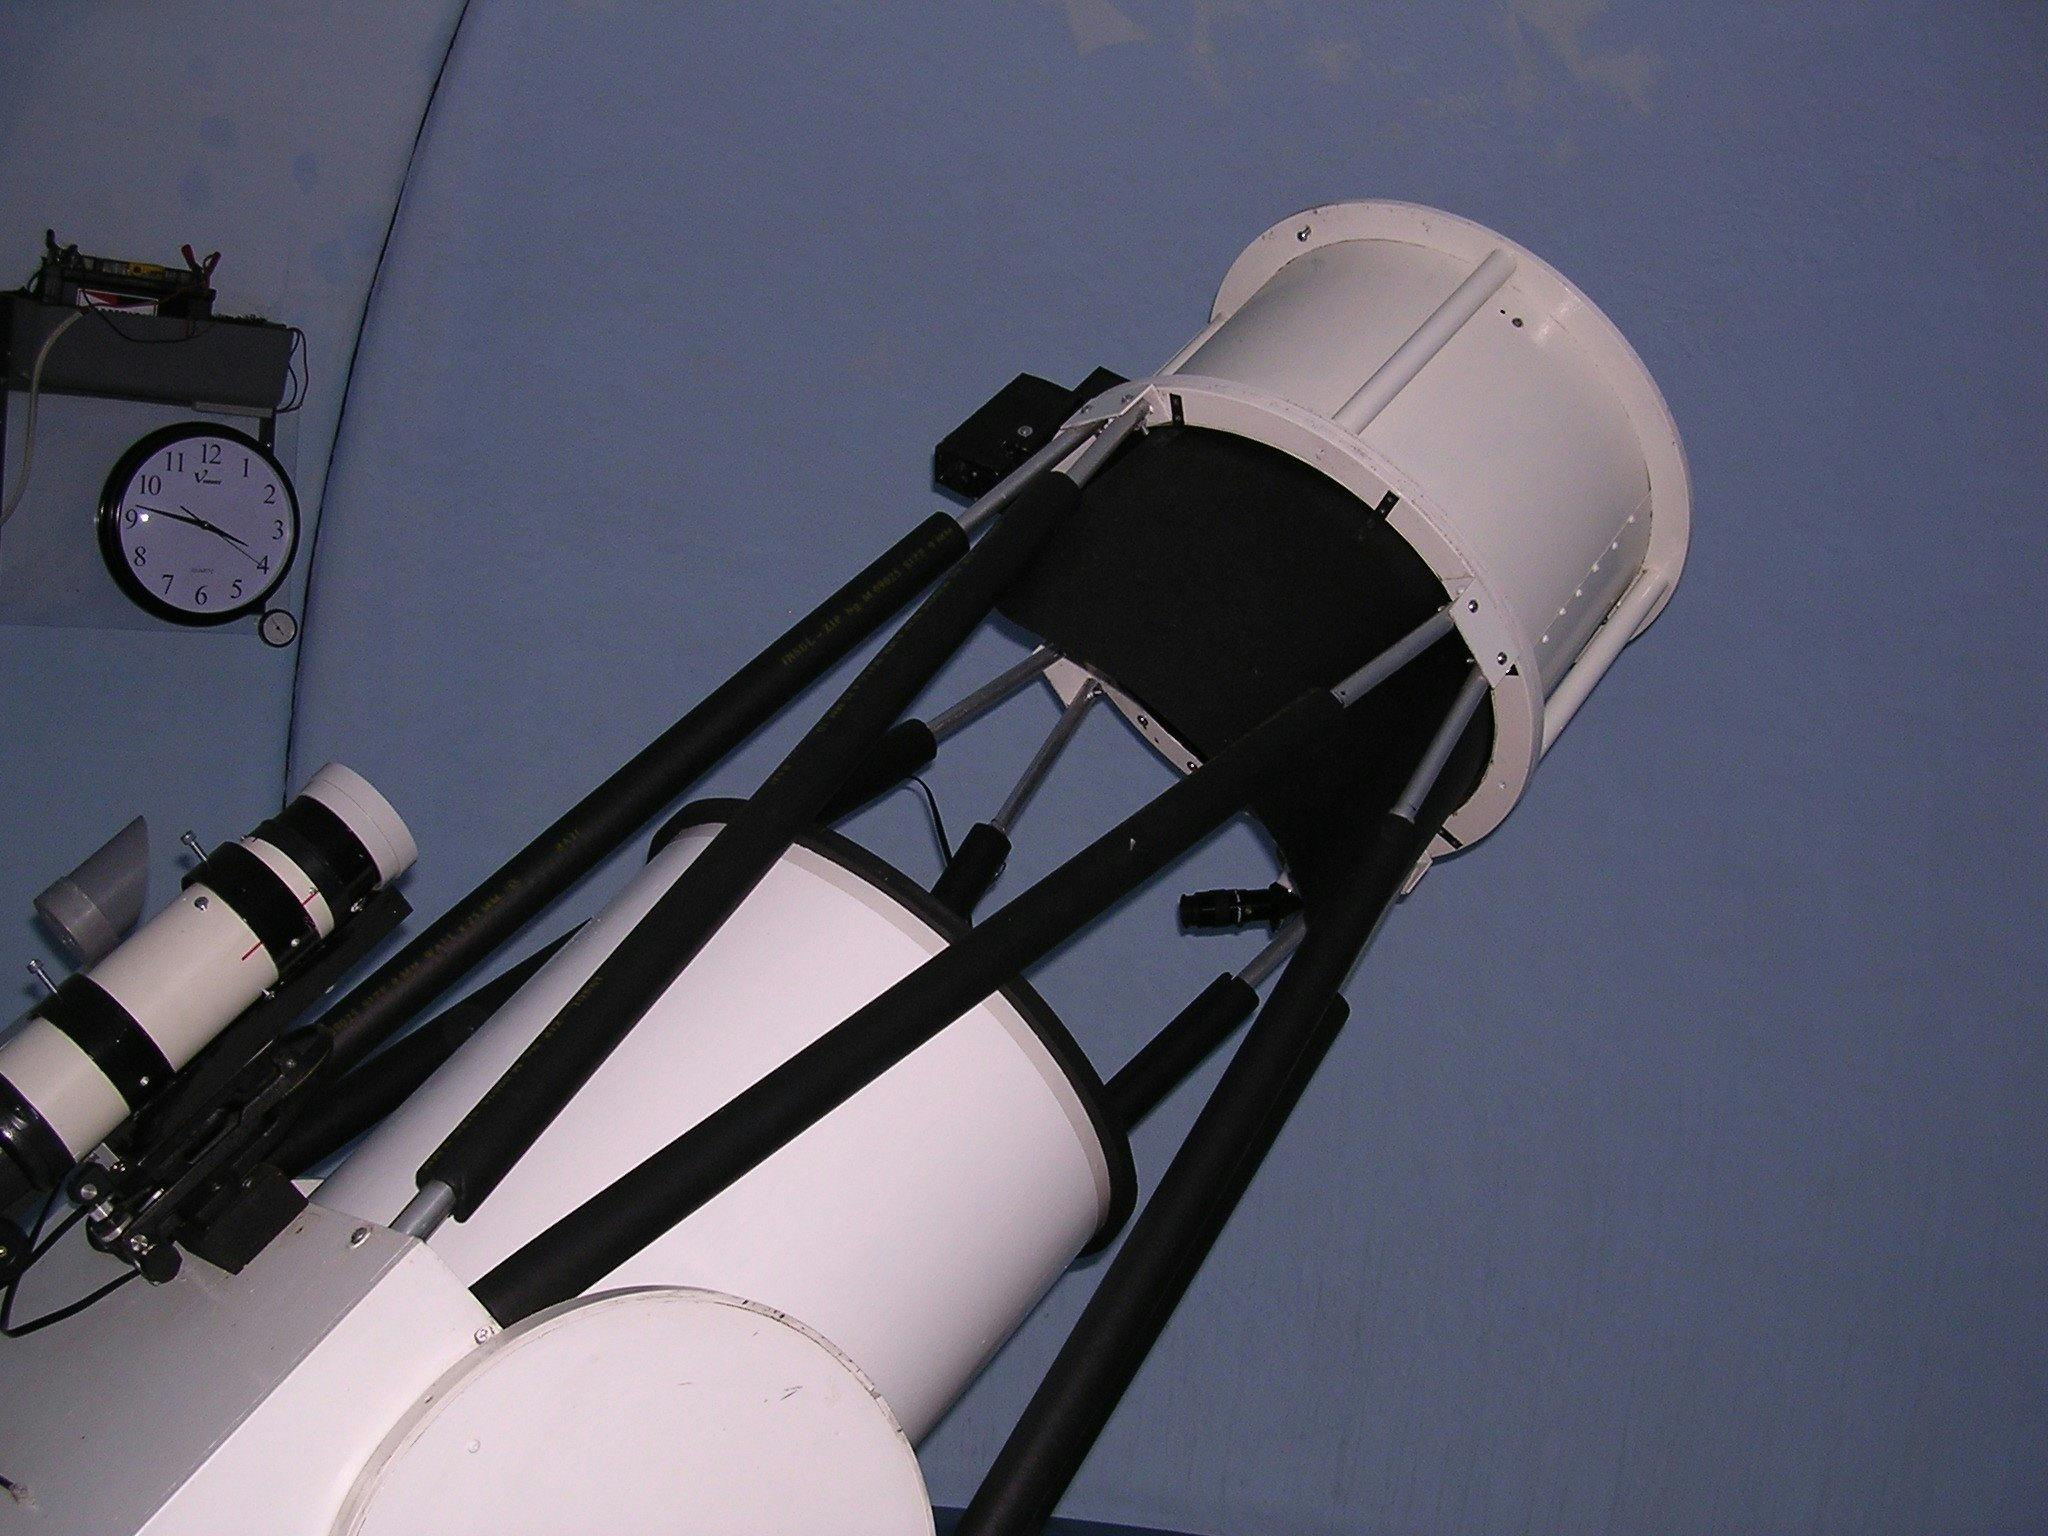 A large telescope is used for the guided night sky tour.